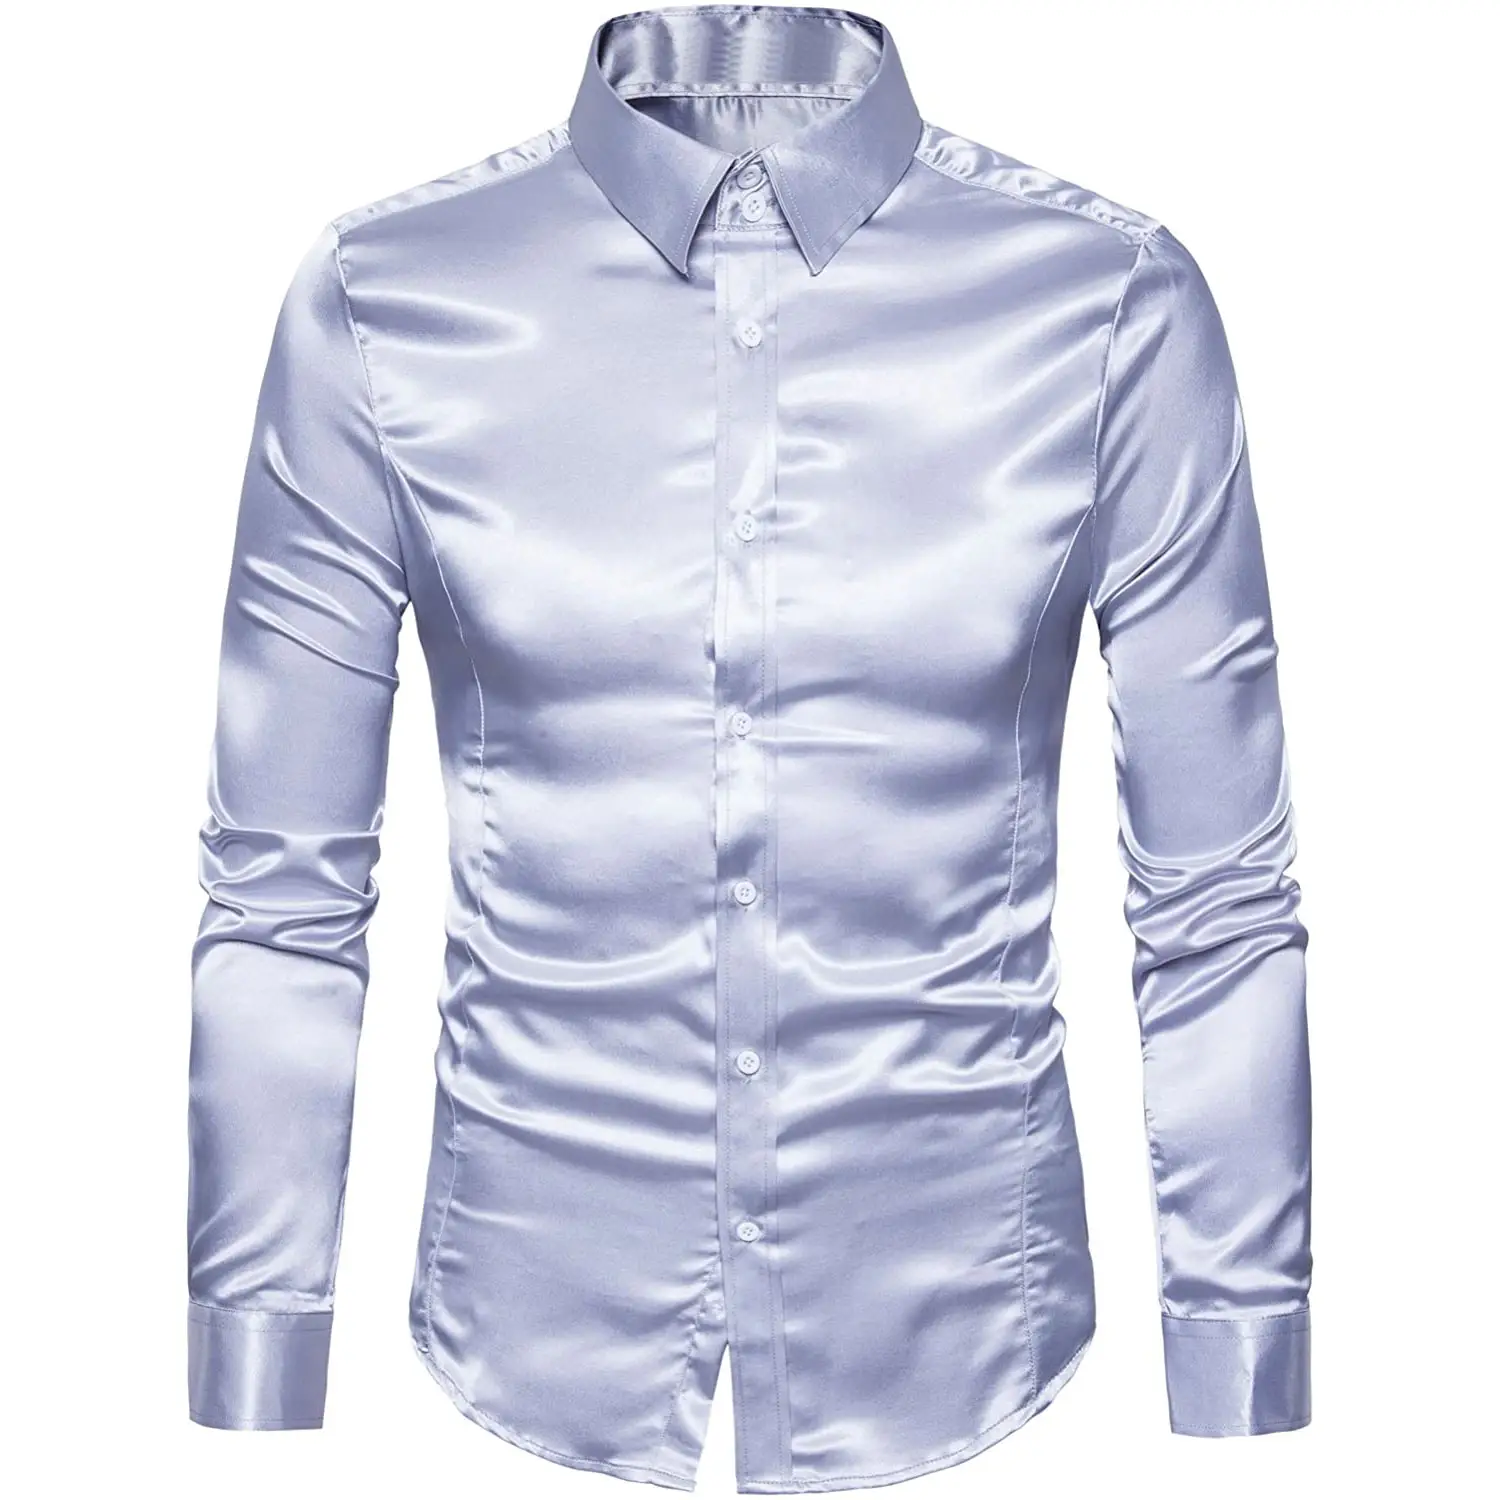 Factory direct cheap prices Men's Long Sleeve Slim Fit Silk Like Satin Prom Button Down Shirt